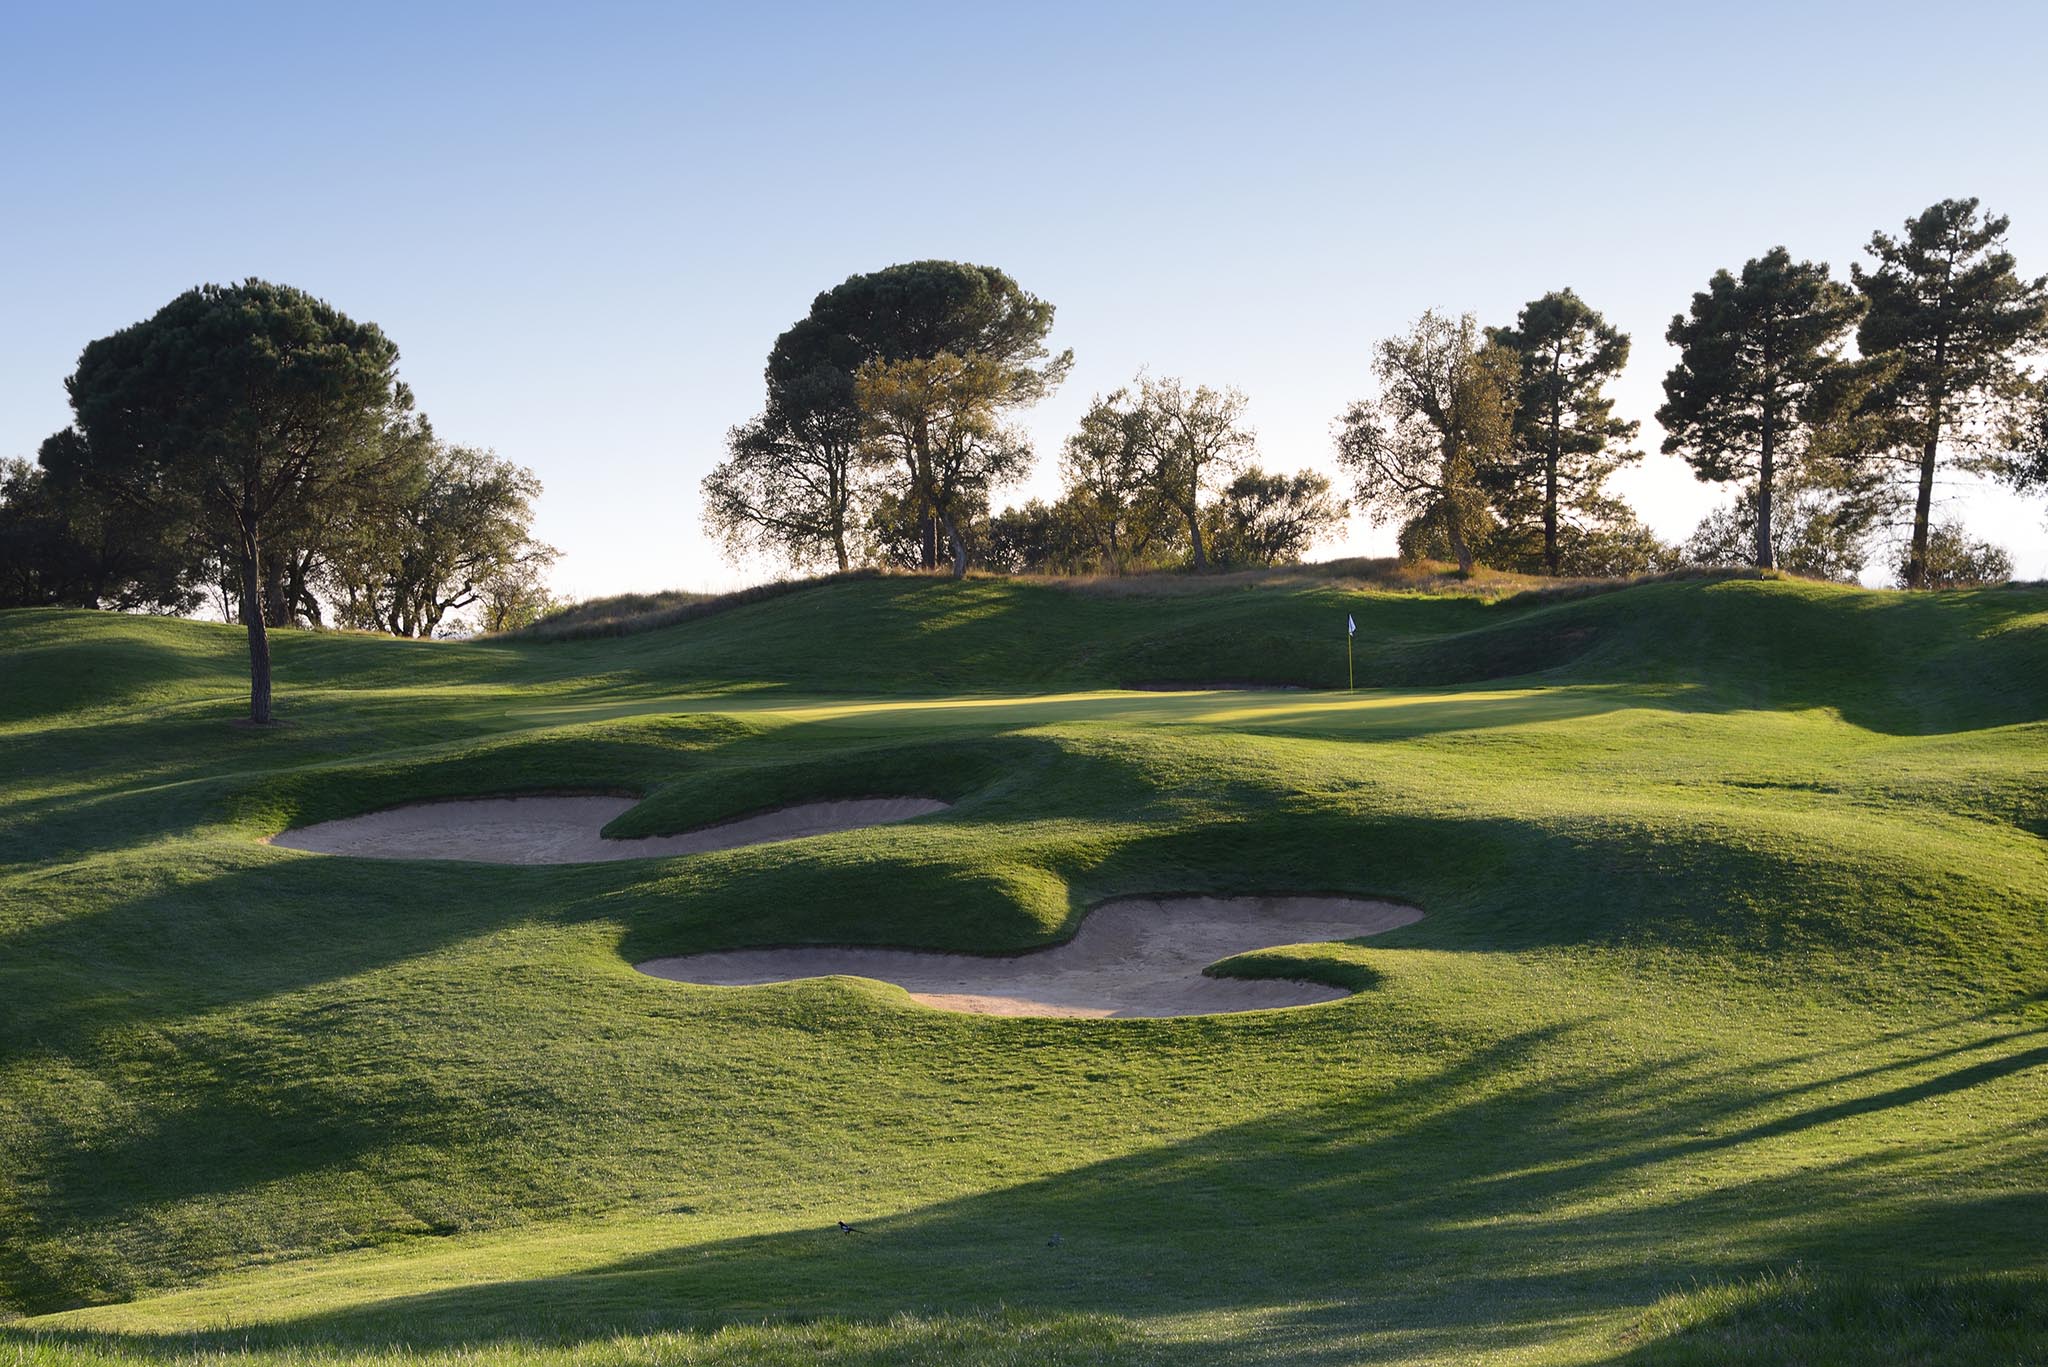 A raised sixteenth green is protected by large odd-shaped bunkers